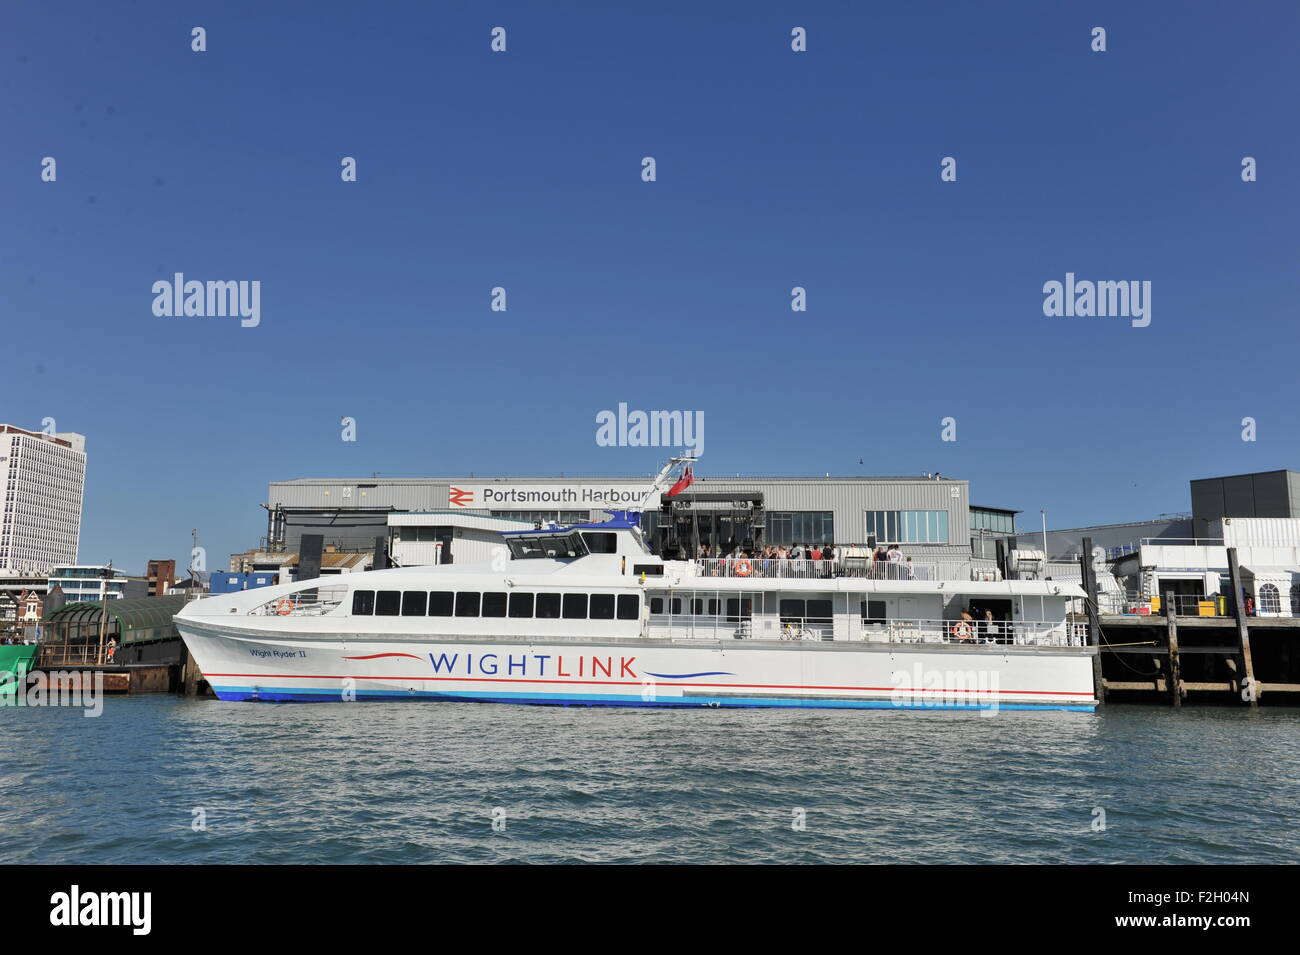 Portsmouth Hampshire UK - Portsmouth Harbour Railway Station and Wightlink cross Solent Isle of Wight ferry Stock Photo